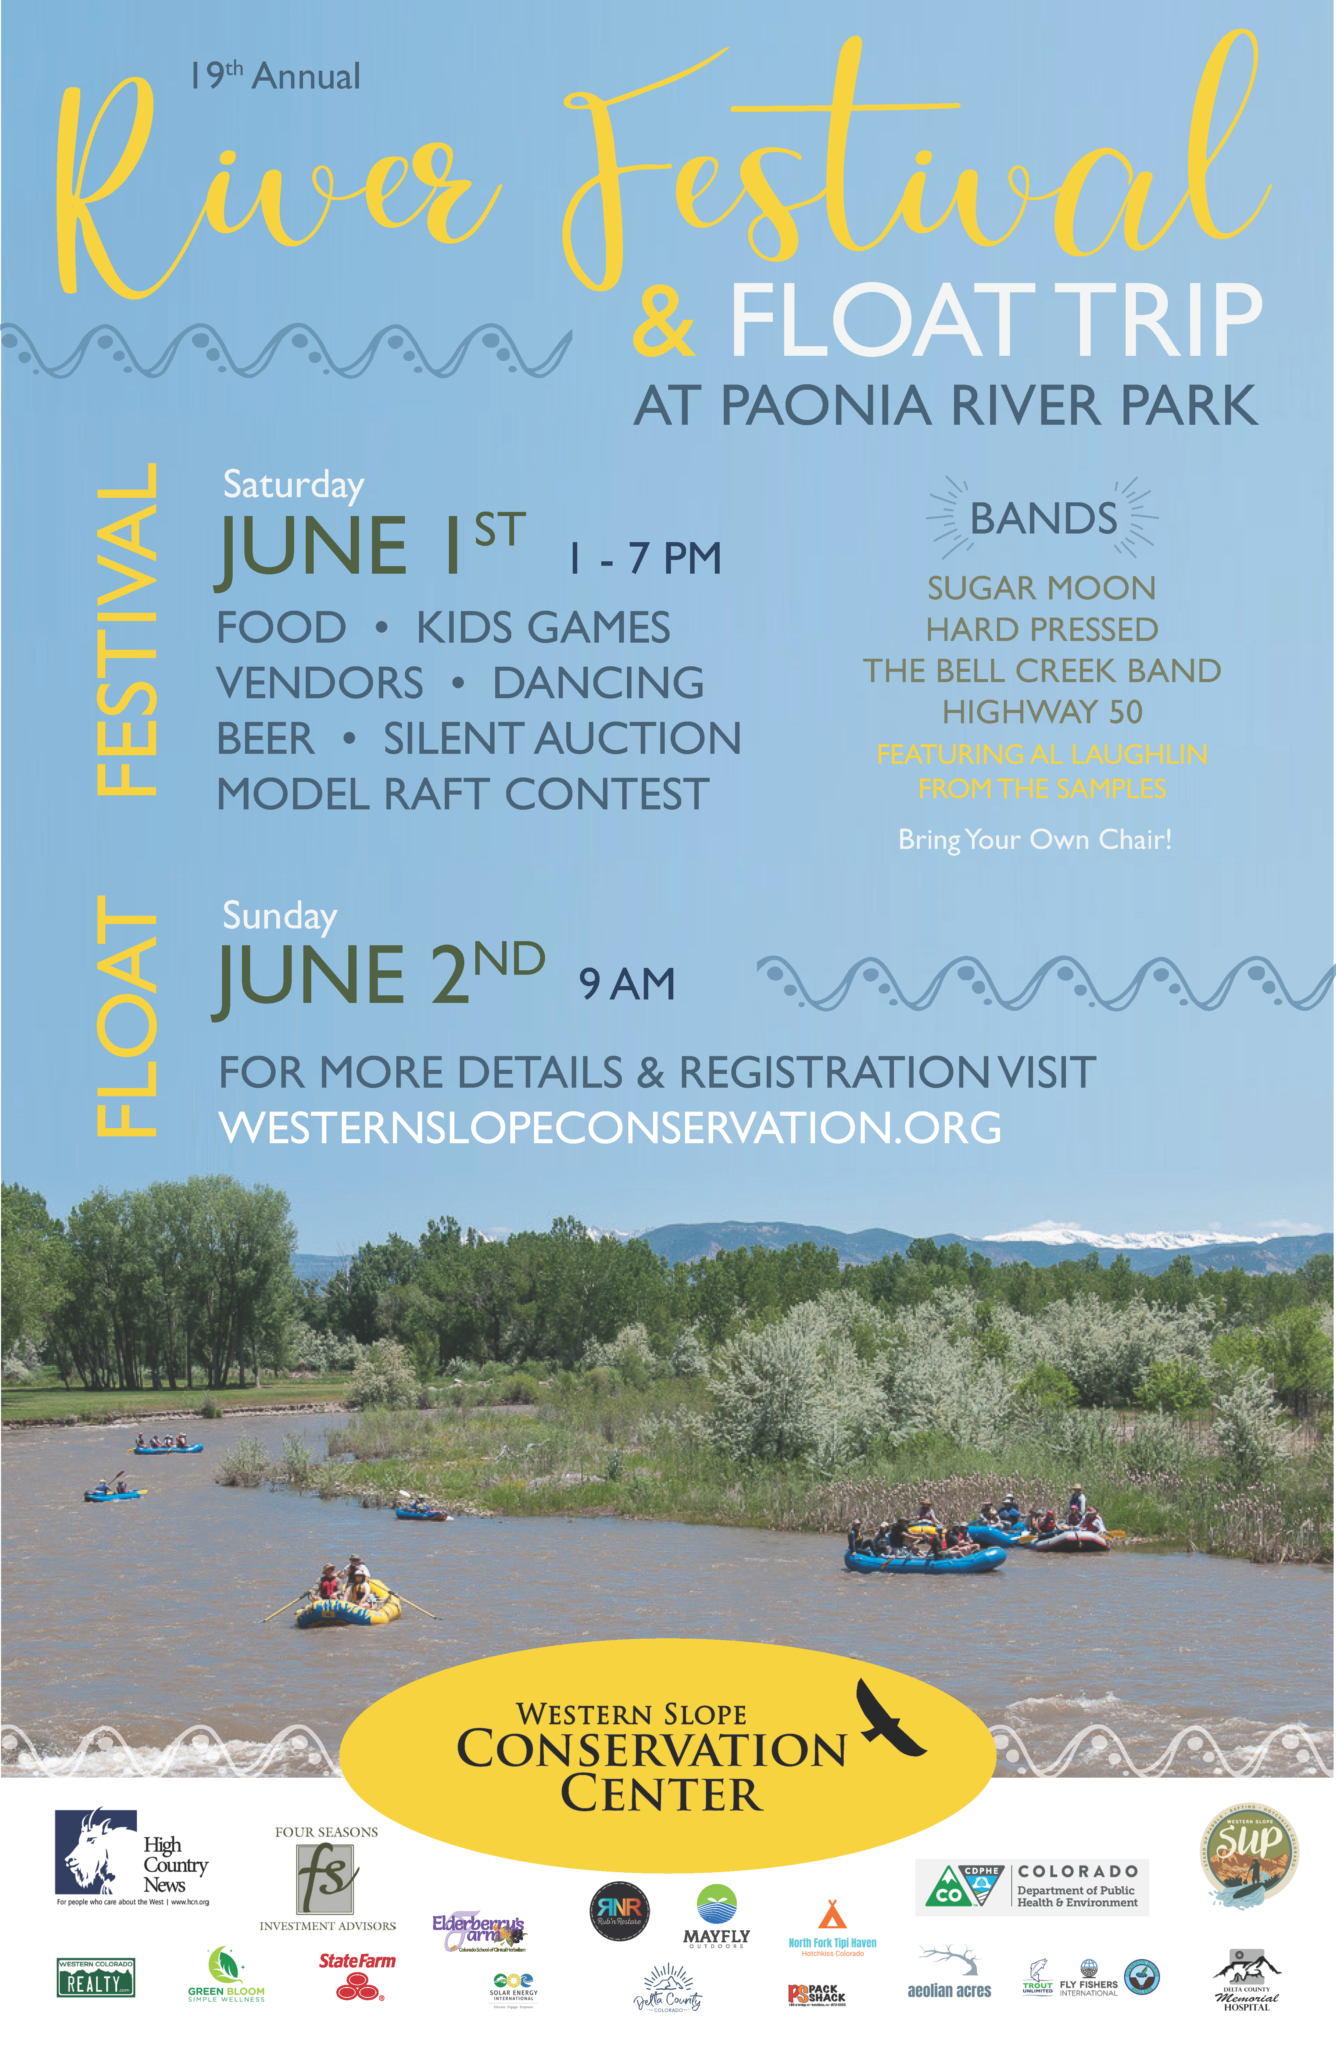 Celebrate Our Watershed at the 19th Annual River Festival! Western